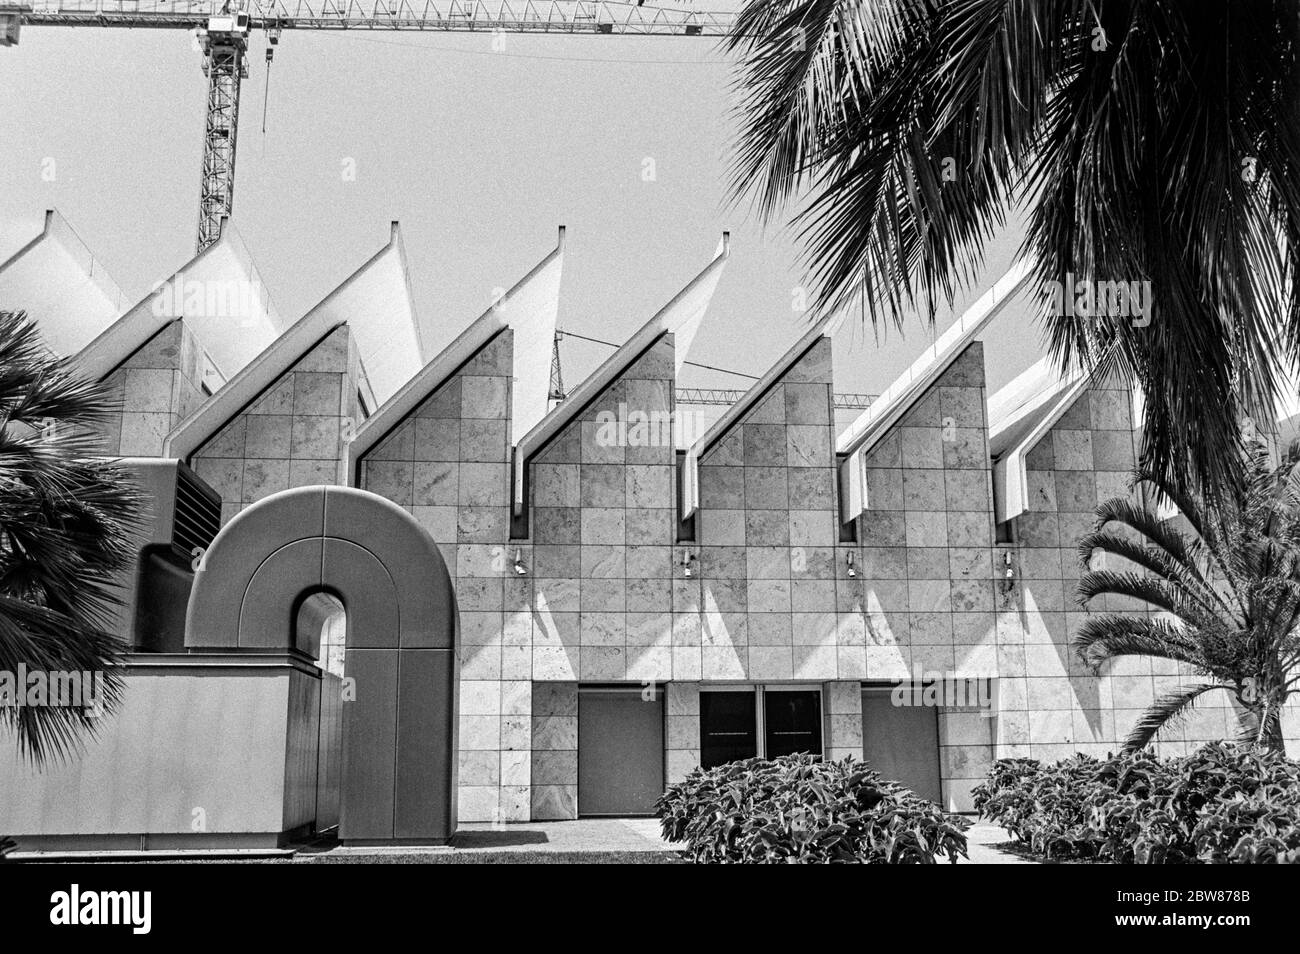 Black and White Building in Downtown L.A. Near La Brea Tar Pits, Angled Roof and Construction Crane Stock Photo